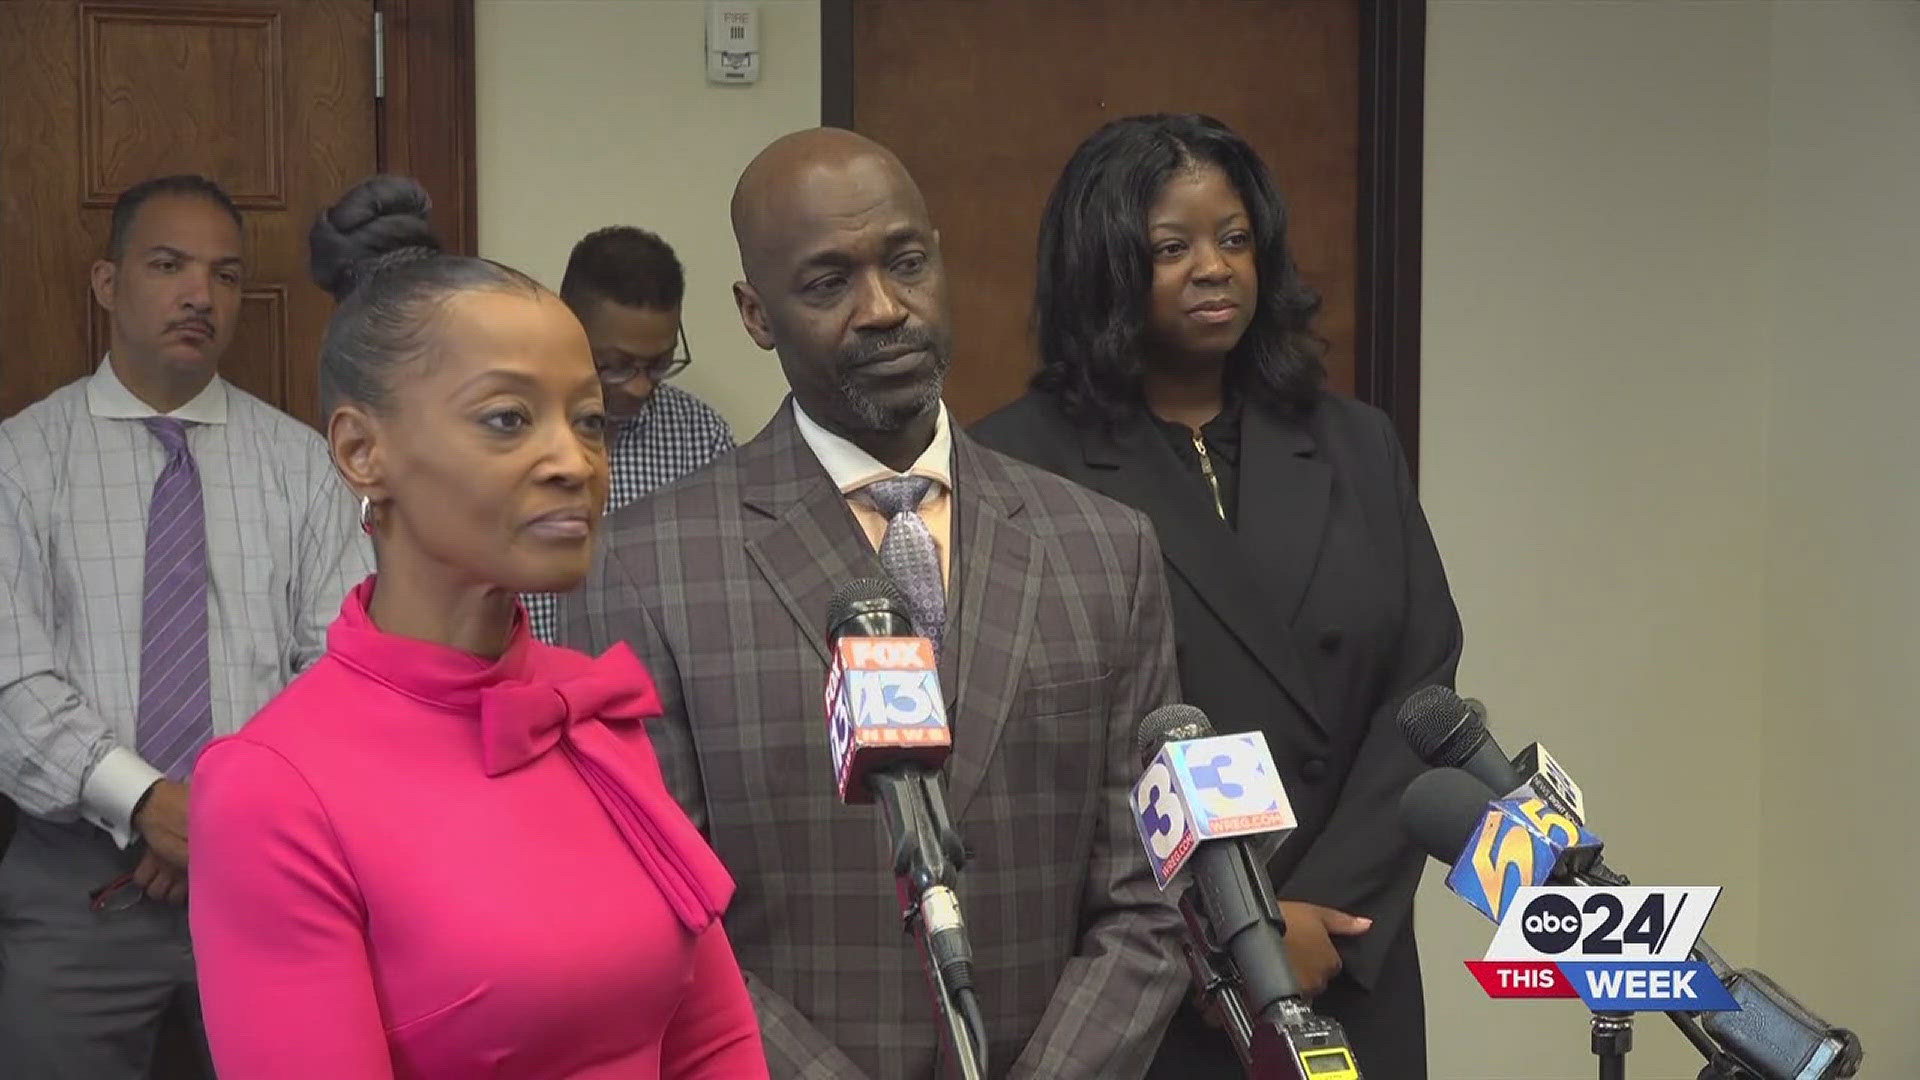 Shelby County Clerk Wanda Halbert held a press conference in an effort to defend her name as the future of her place in local government appears uncertain.